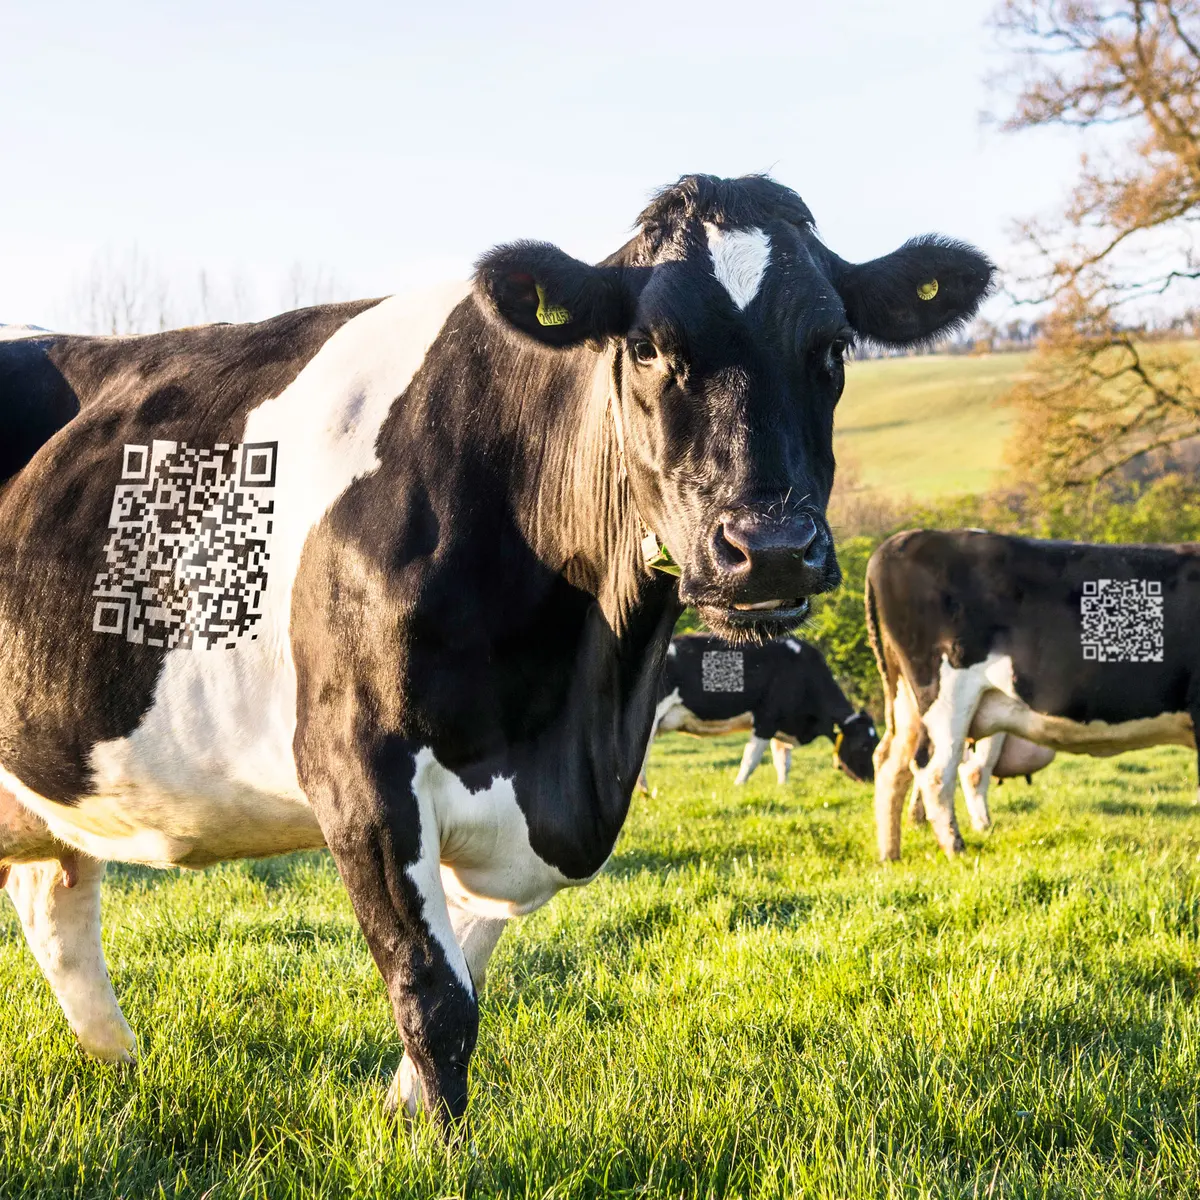 State Bank of Pakistan Introduces QR Code Payments for Eid al-Adha Livestock Purchases